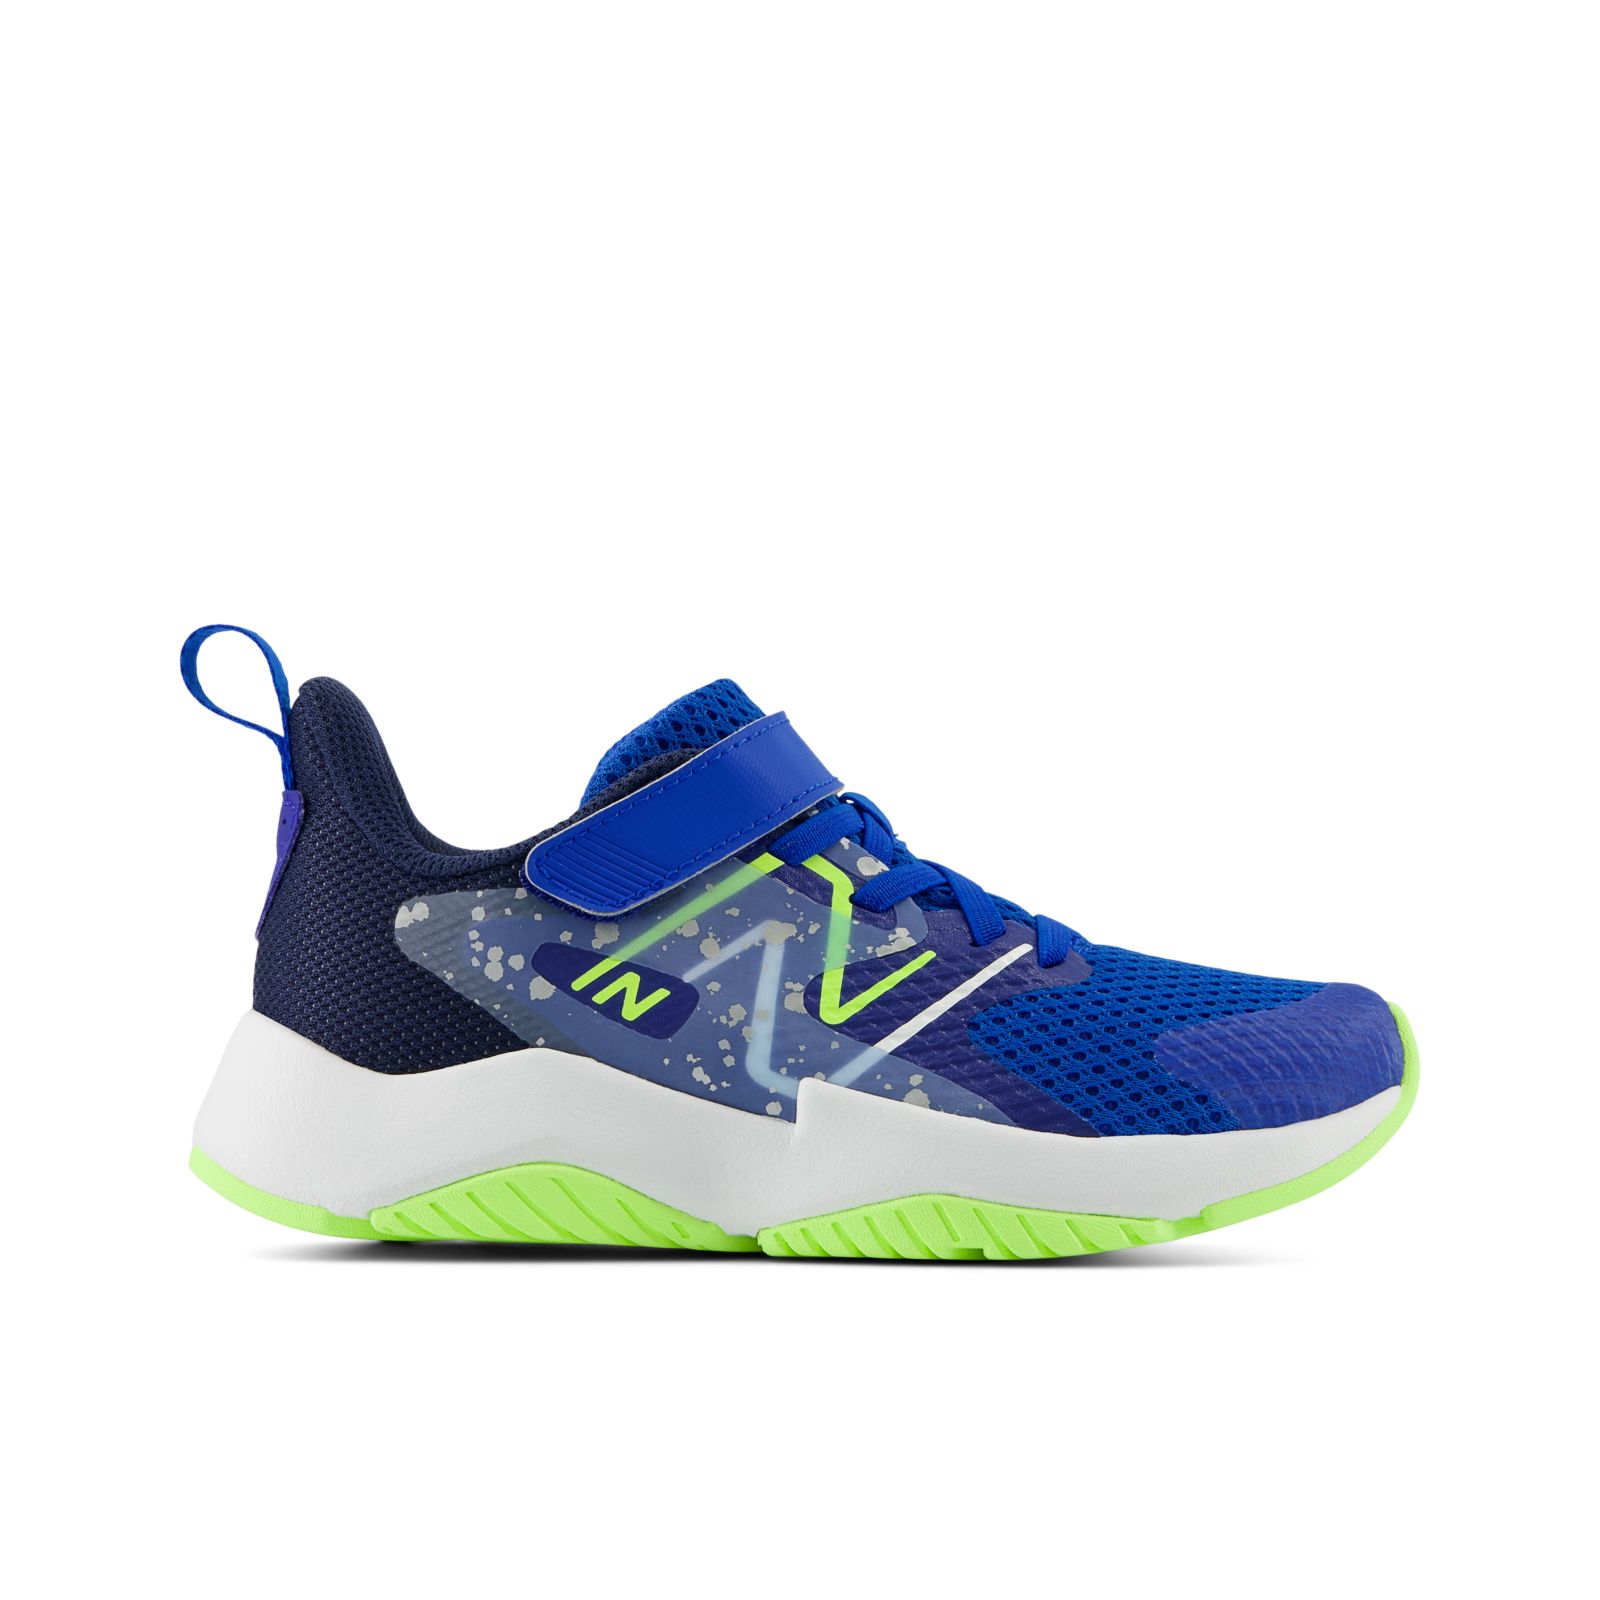 Rave Run v2 Bungee Lace with Top Strap - New Balance